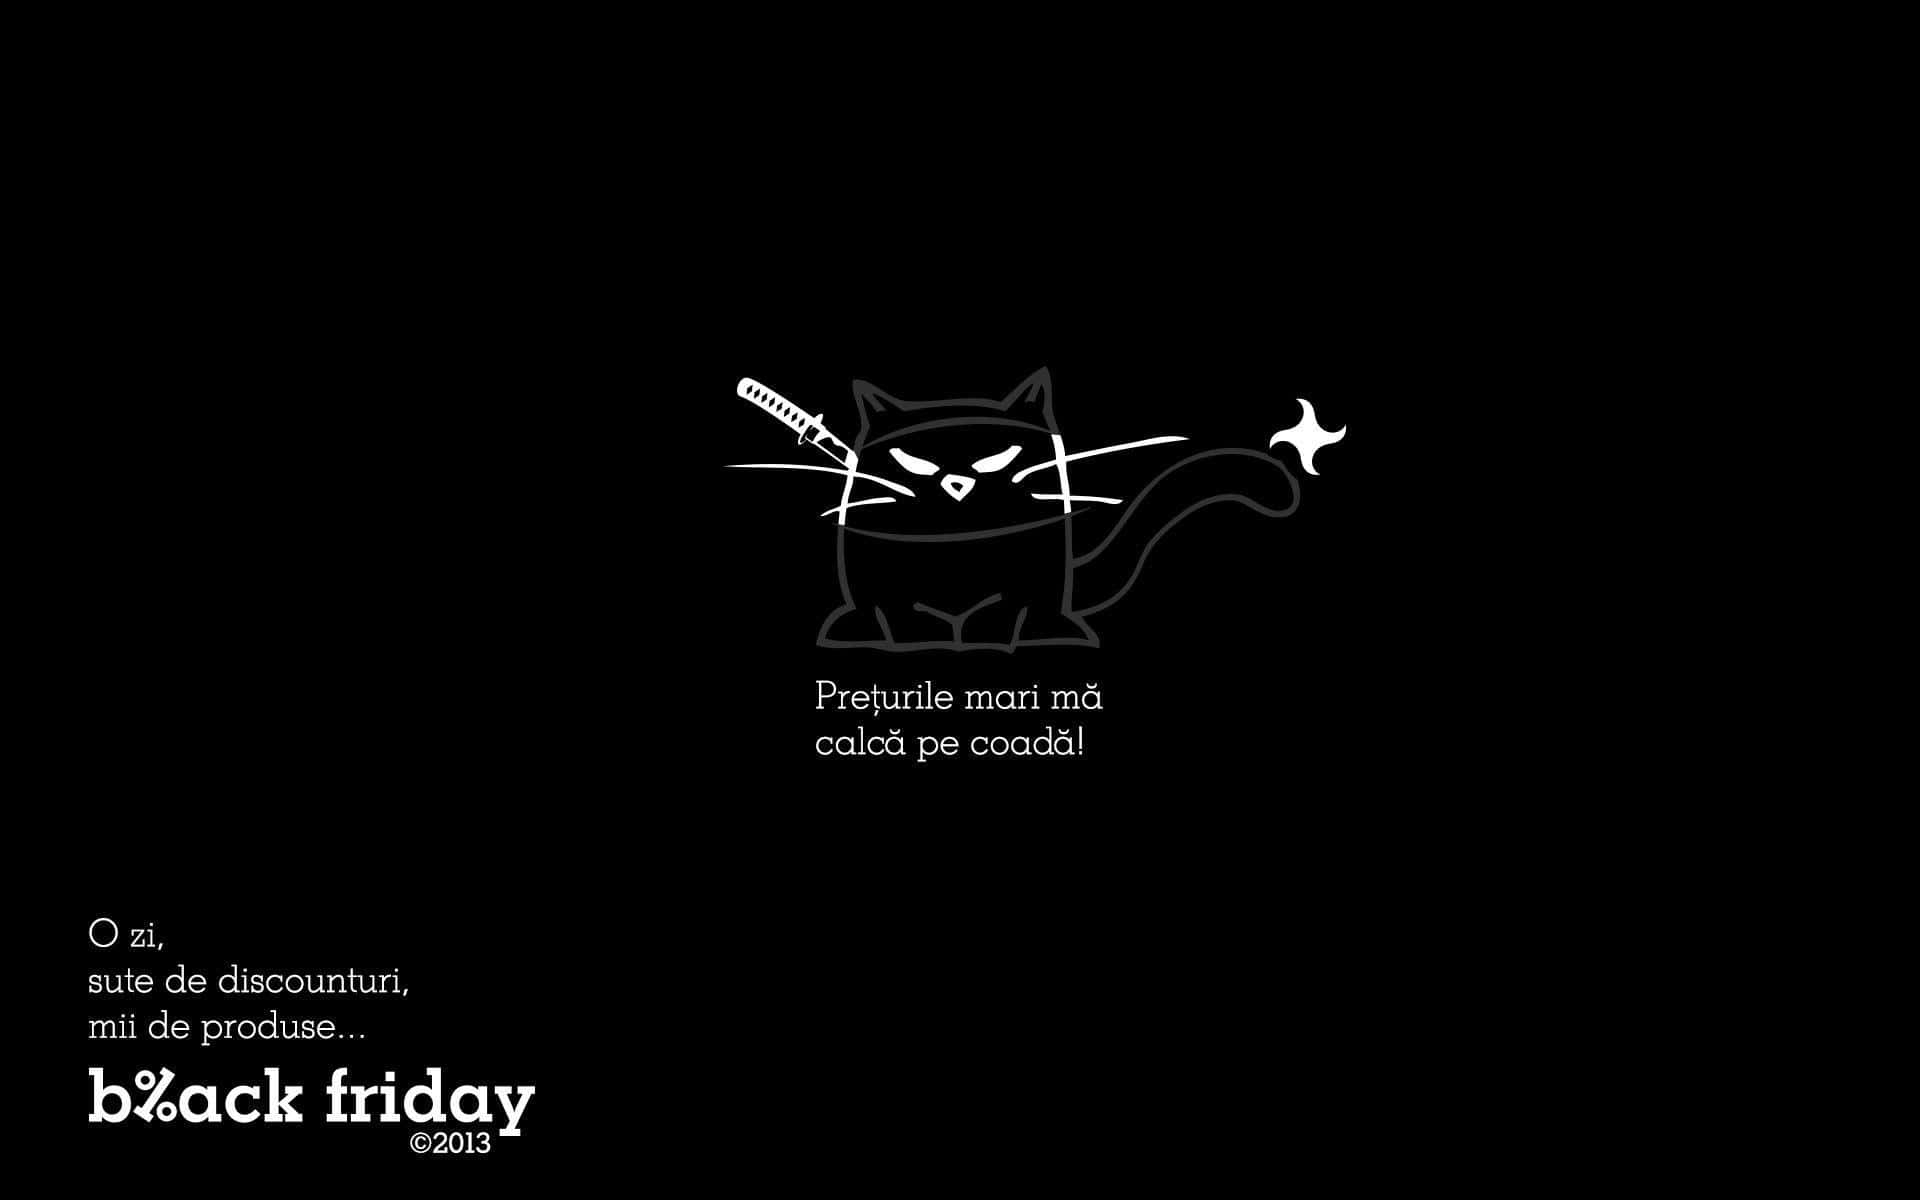 Black Friday - A Black Cat With A Knife